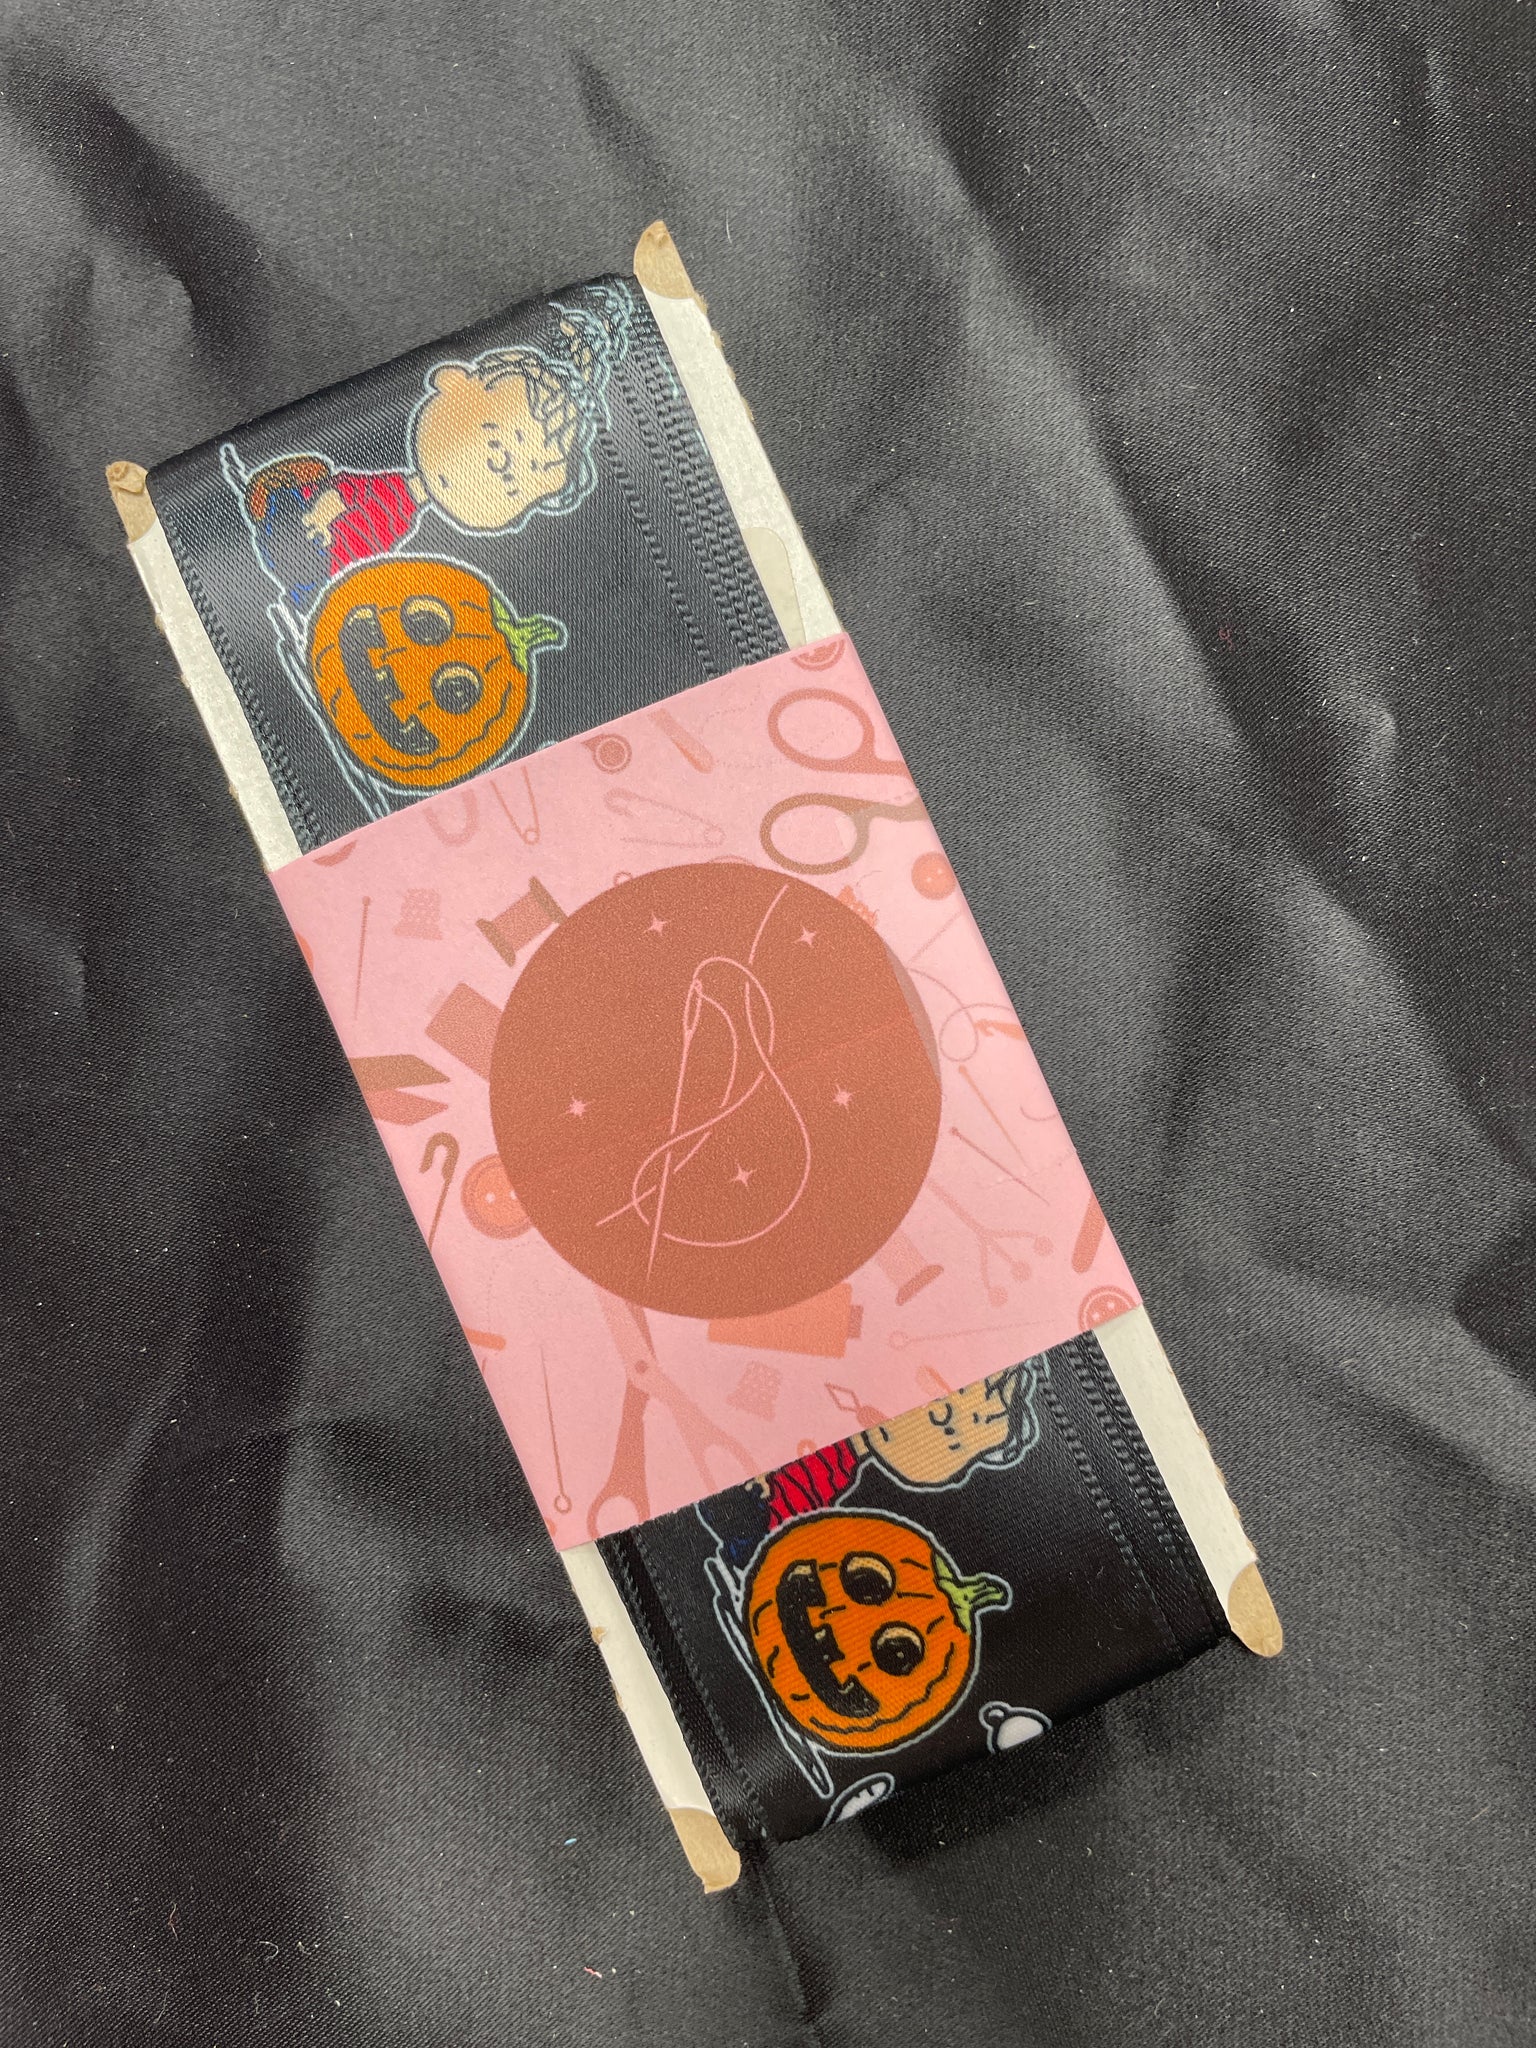 2012 3 YD Polyester Printed Satin Ribbon - Black with "Trick or Treat" and Peanuts Characters